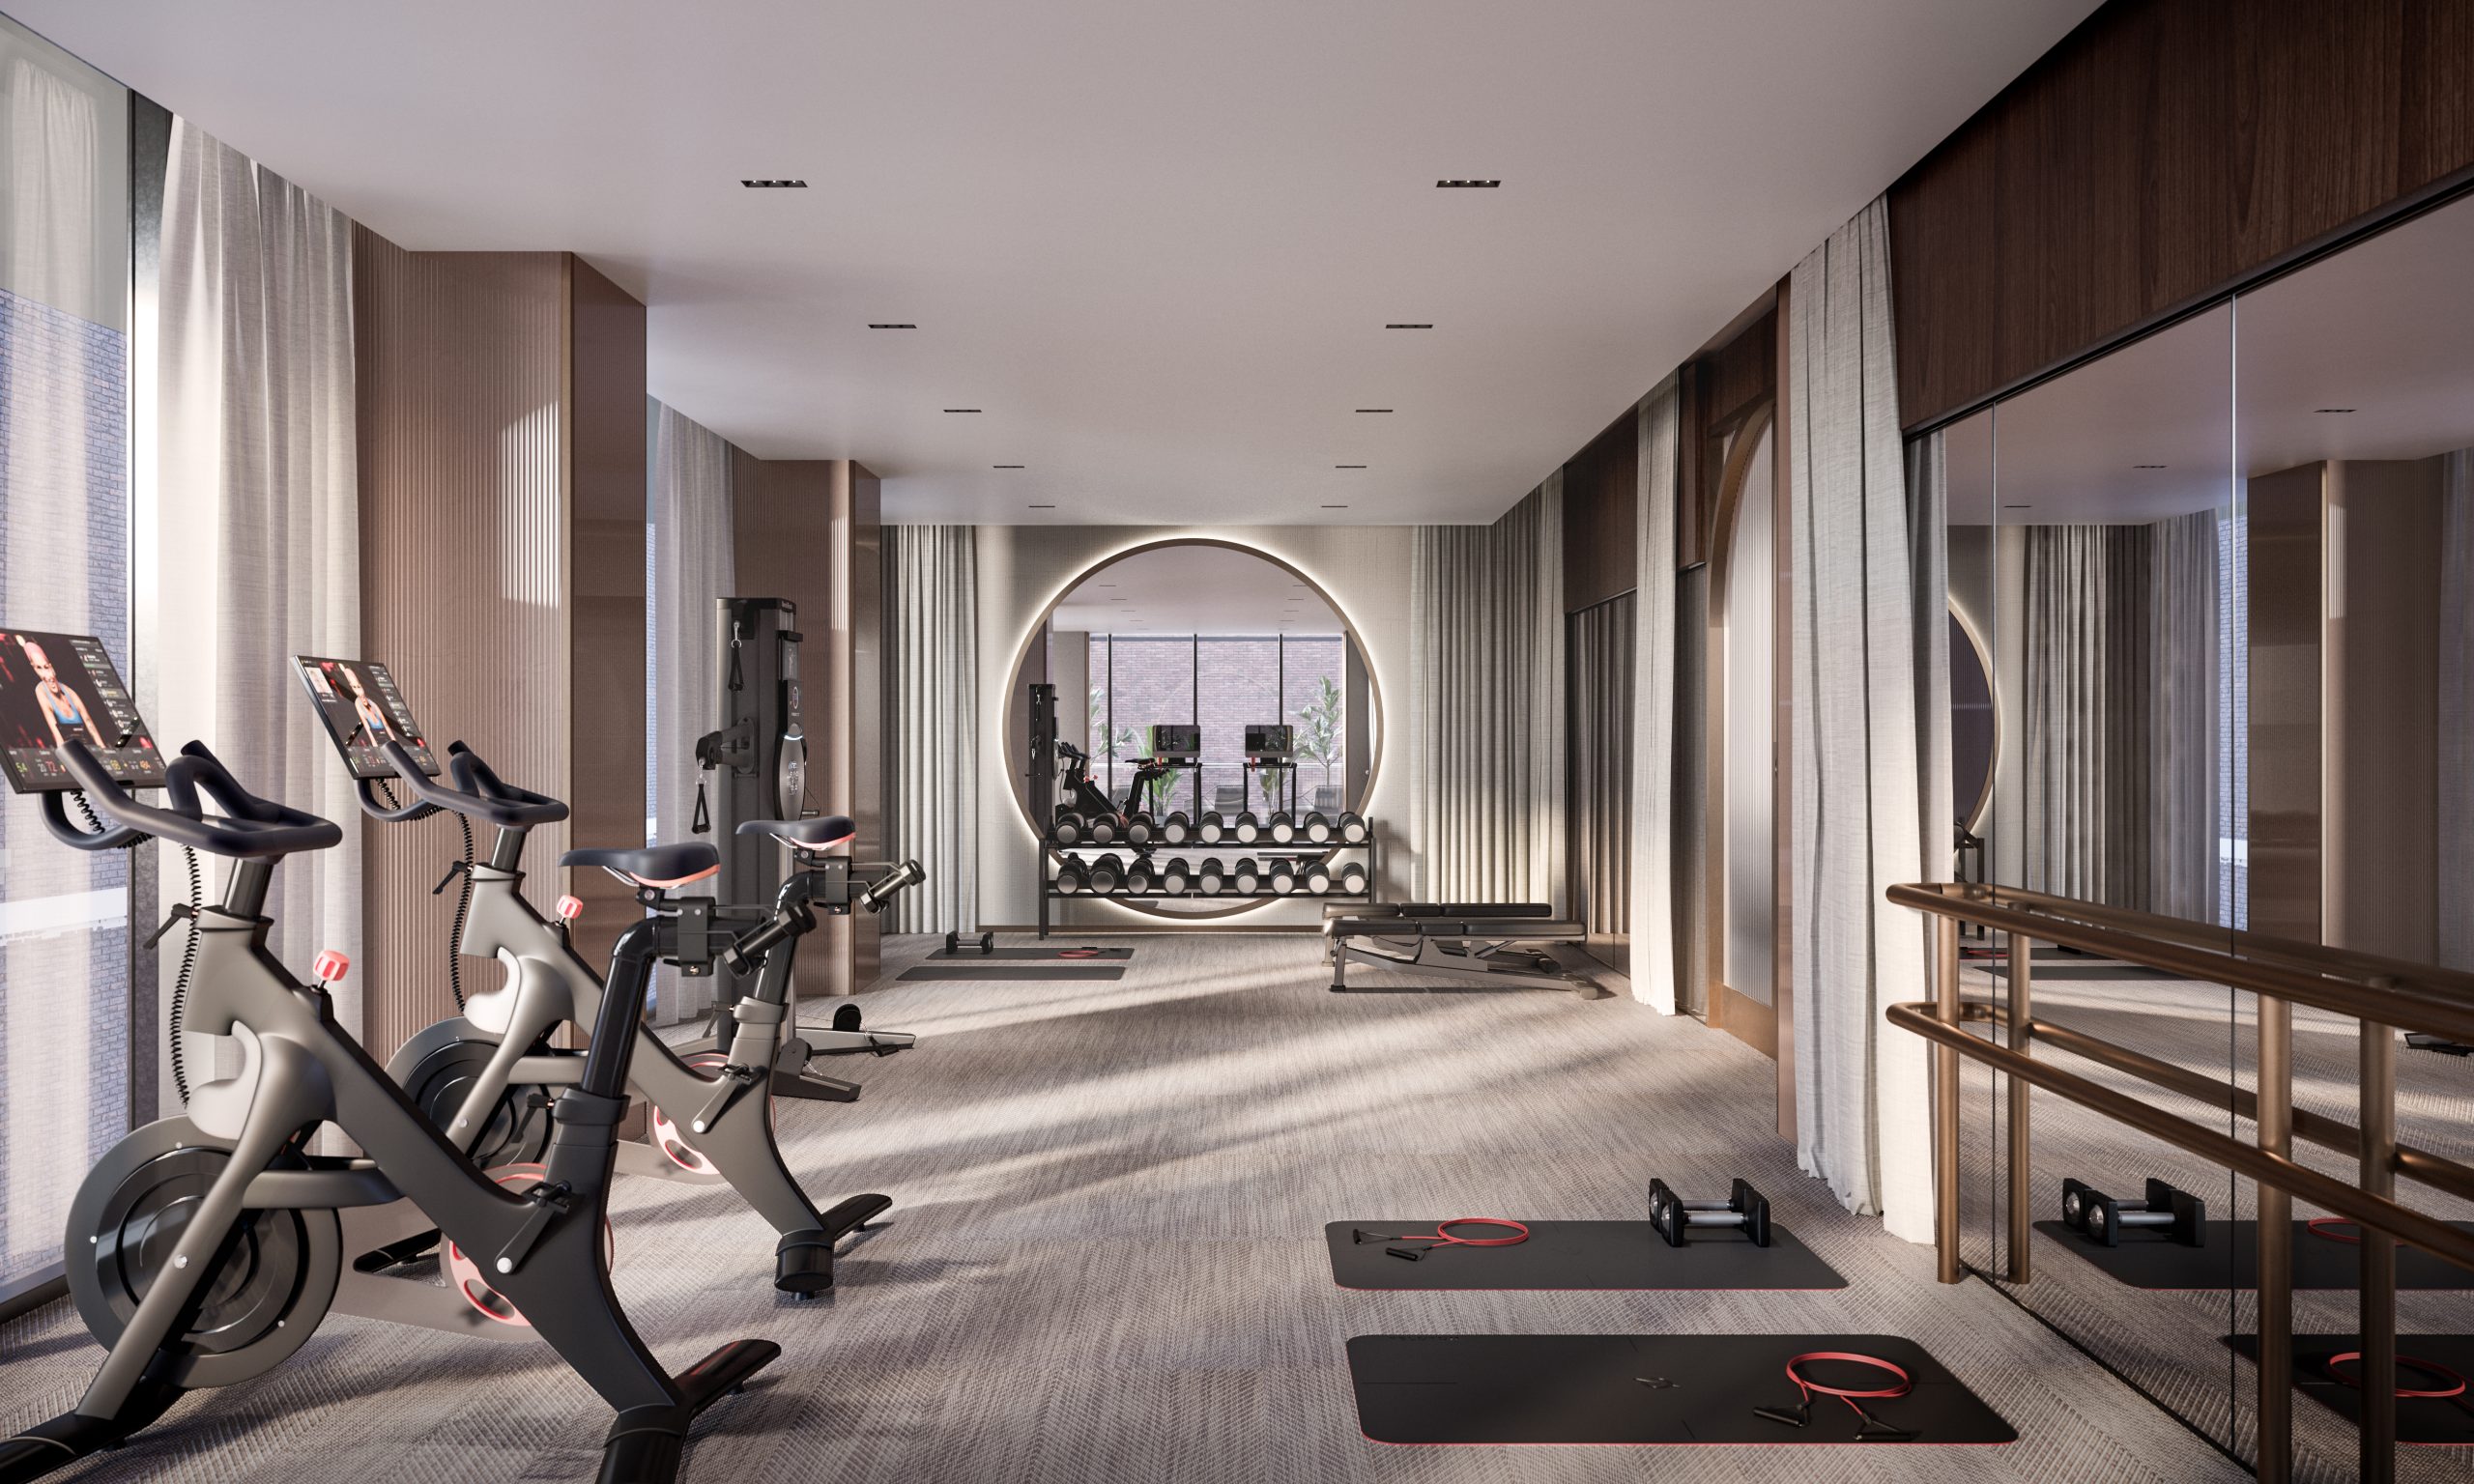 The gym at the Adagio in Yorkville